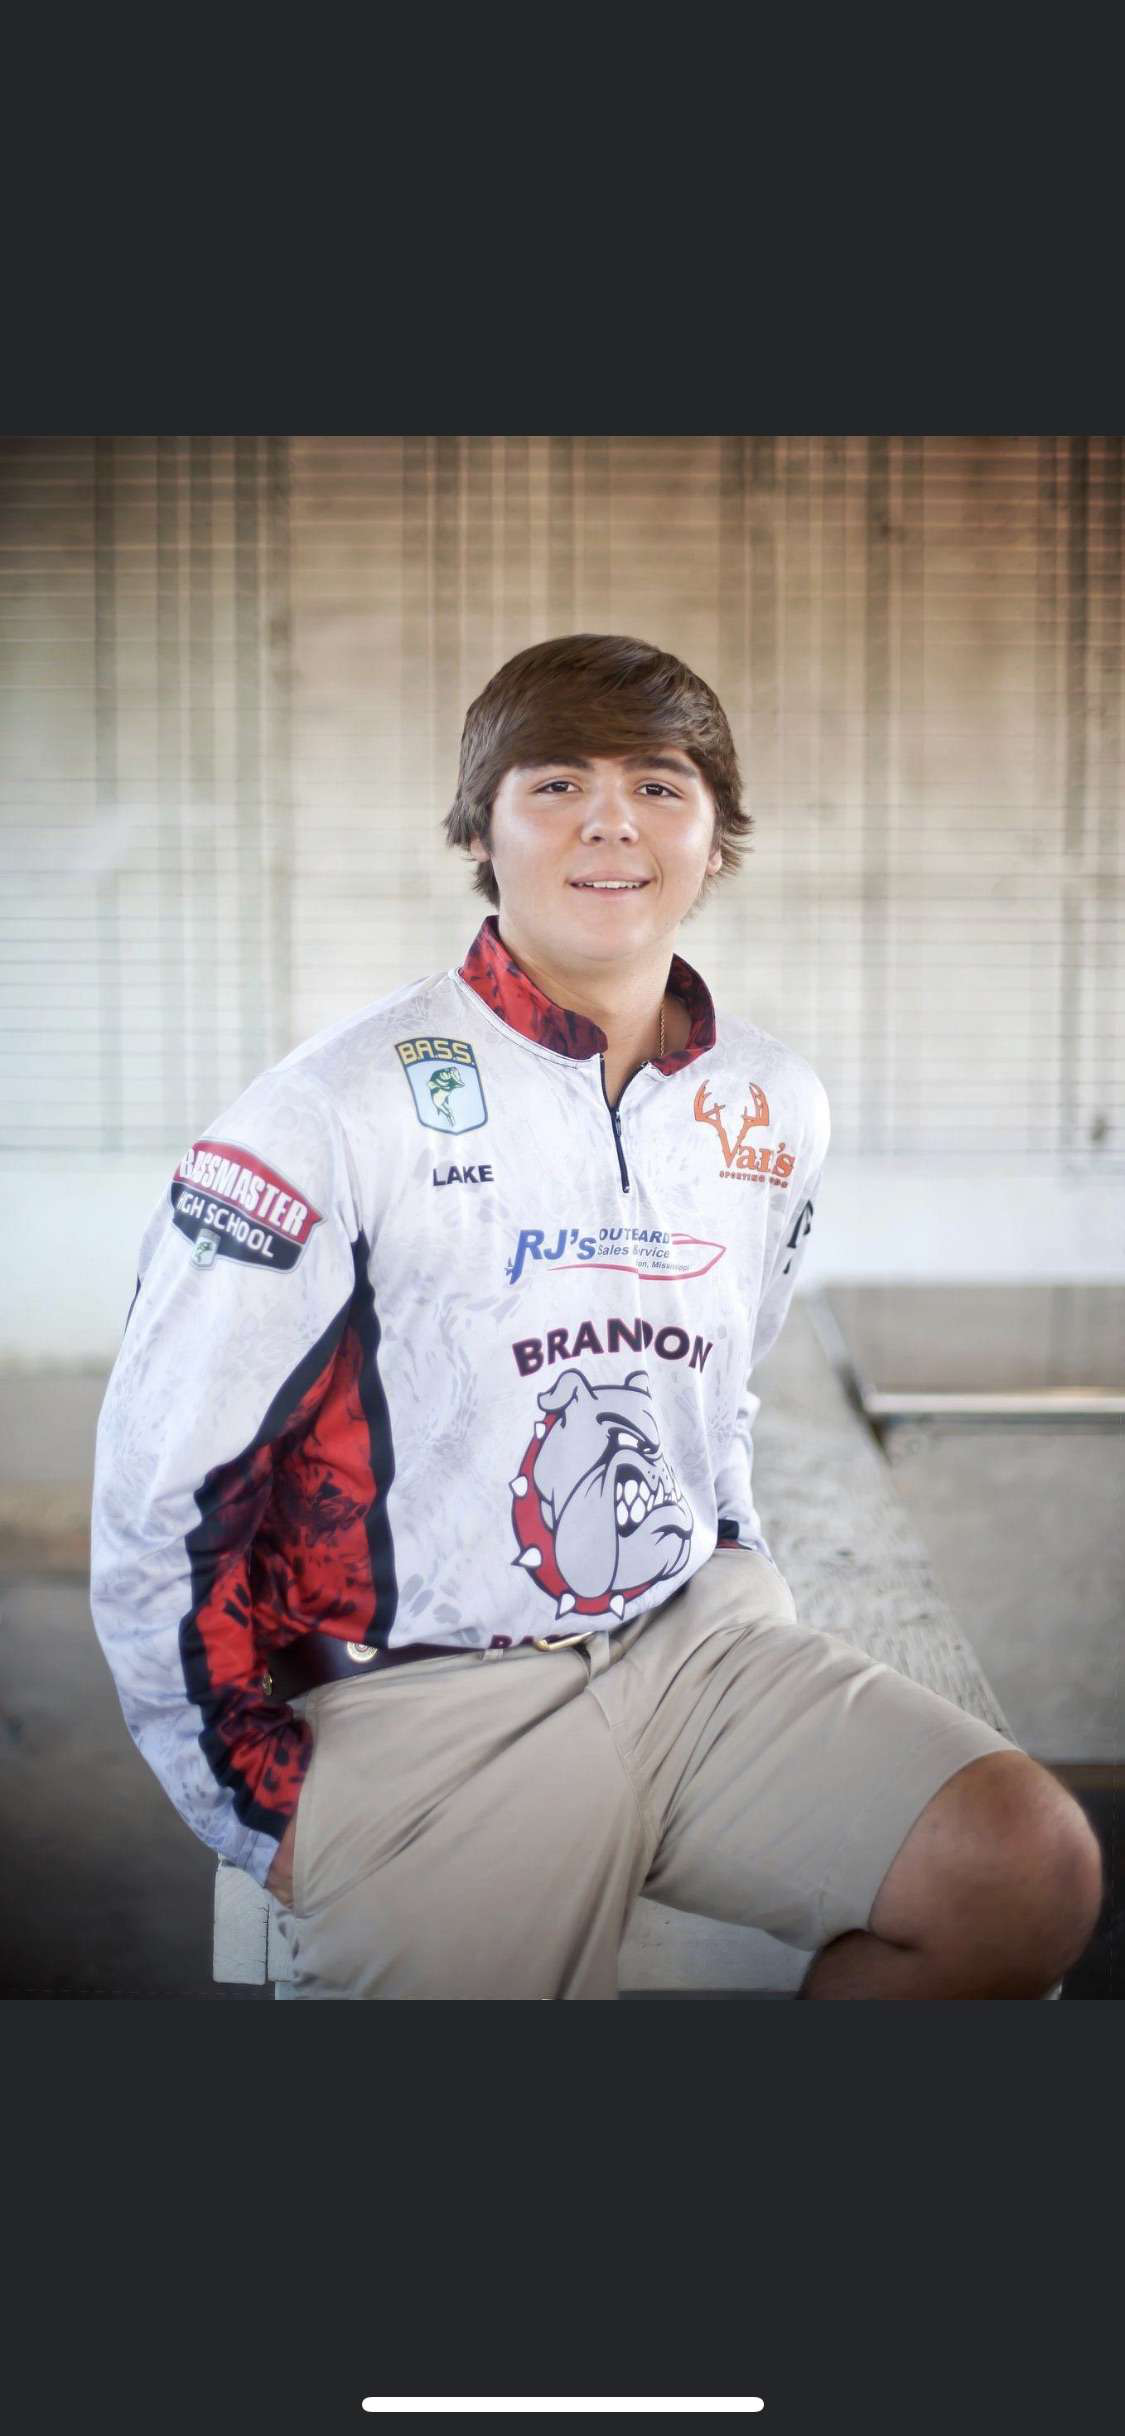 <b>Lake Norsworthy, Brandon, Miss. </b><br> Norsworthy, a senior at Brandon High School, has an impressive five wins this tournament season as well as 10 Top 5 finishes. In fact, he has never finished outside of the Top 20 in his division in the past five years. Over the past five years, he has qualified for the Bassmaster High School National Championship, where he placed 20th in 2019.  <p> In addition to his tournament success, he has been an impressive member of the community, volunteering his time at both B.A.S.S. Elite and Opens events, working with C.A.S.T. for Kids and doing his part to keep Ross Barnett Reservoir clean.  <p> âLake is a professional at an early age,â said Mississippi B.A.S.S. Nation President David Patterson. âHe consistently exhibits sportsmanship and courtesy both on and off the water. He is a mentor to his teammates and also other anglers that are much younger than he is. He was recently recognized by a younger angler as someone he wanted to be when he grew up.â 